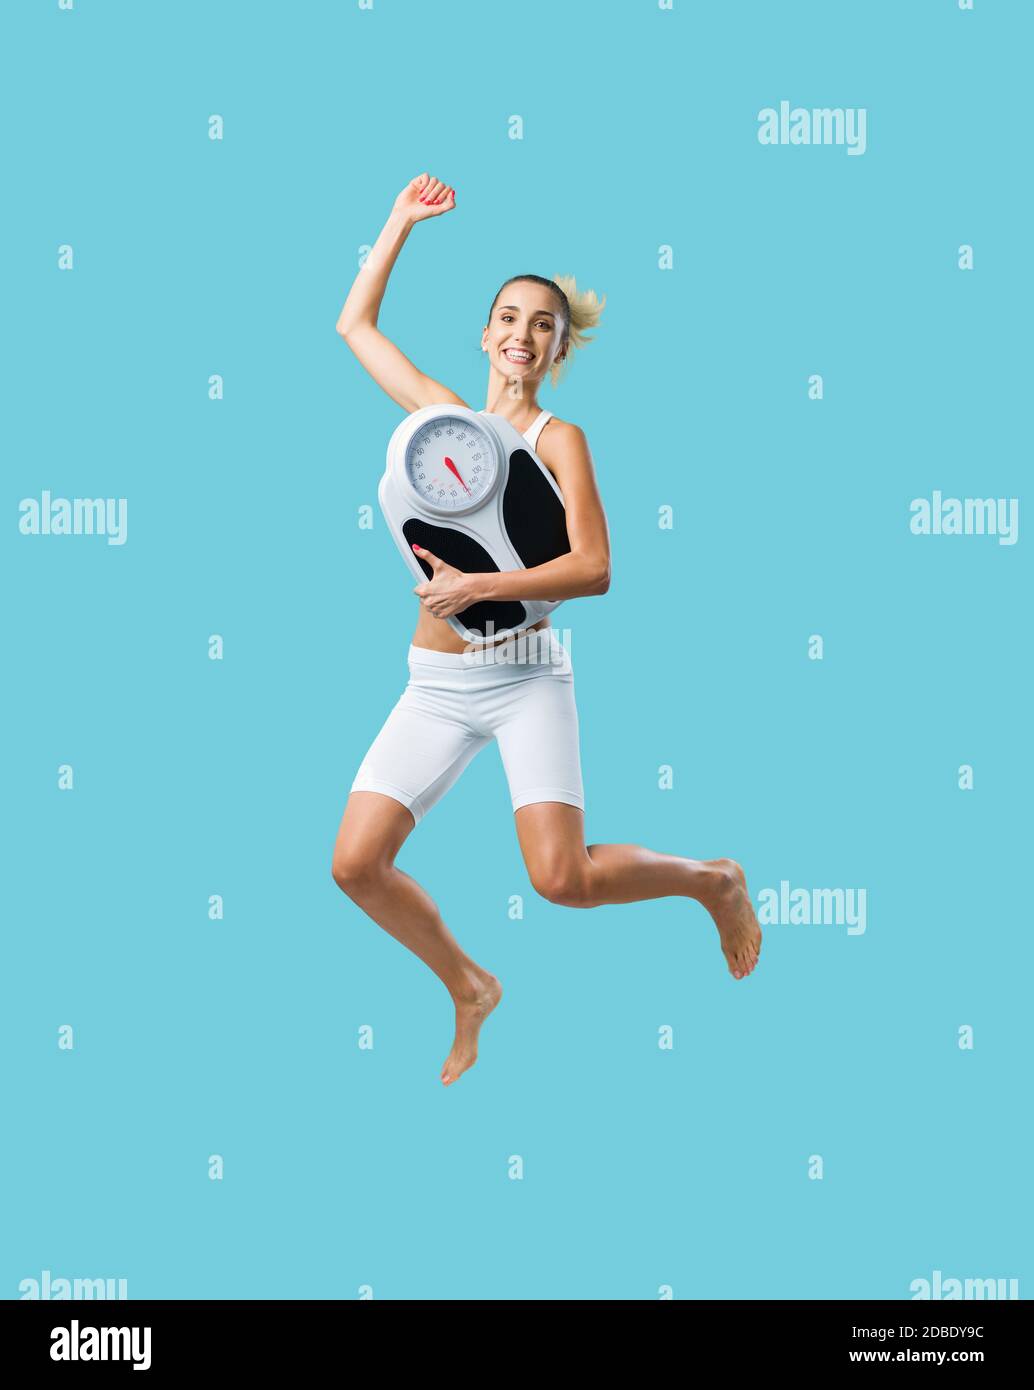 Cheerful young woman jumping and holding a weight scale, weight loss and fitness concept Stock Photo